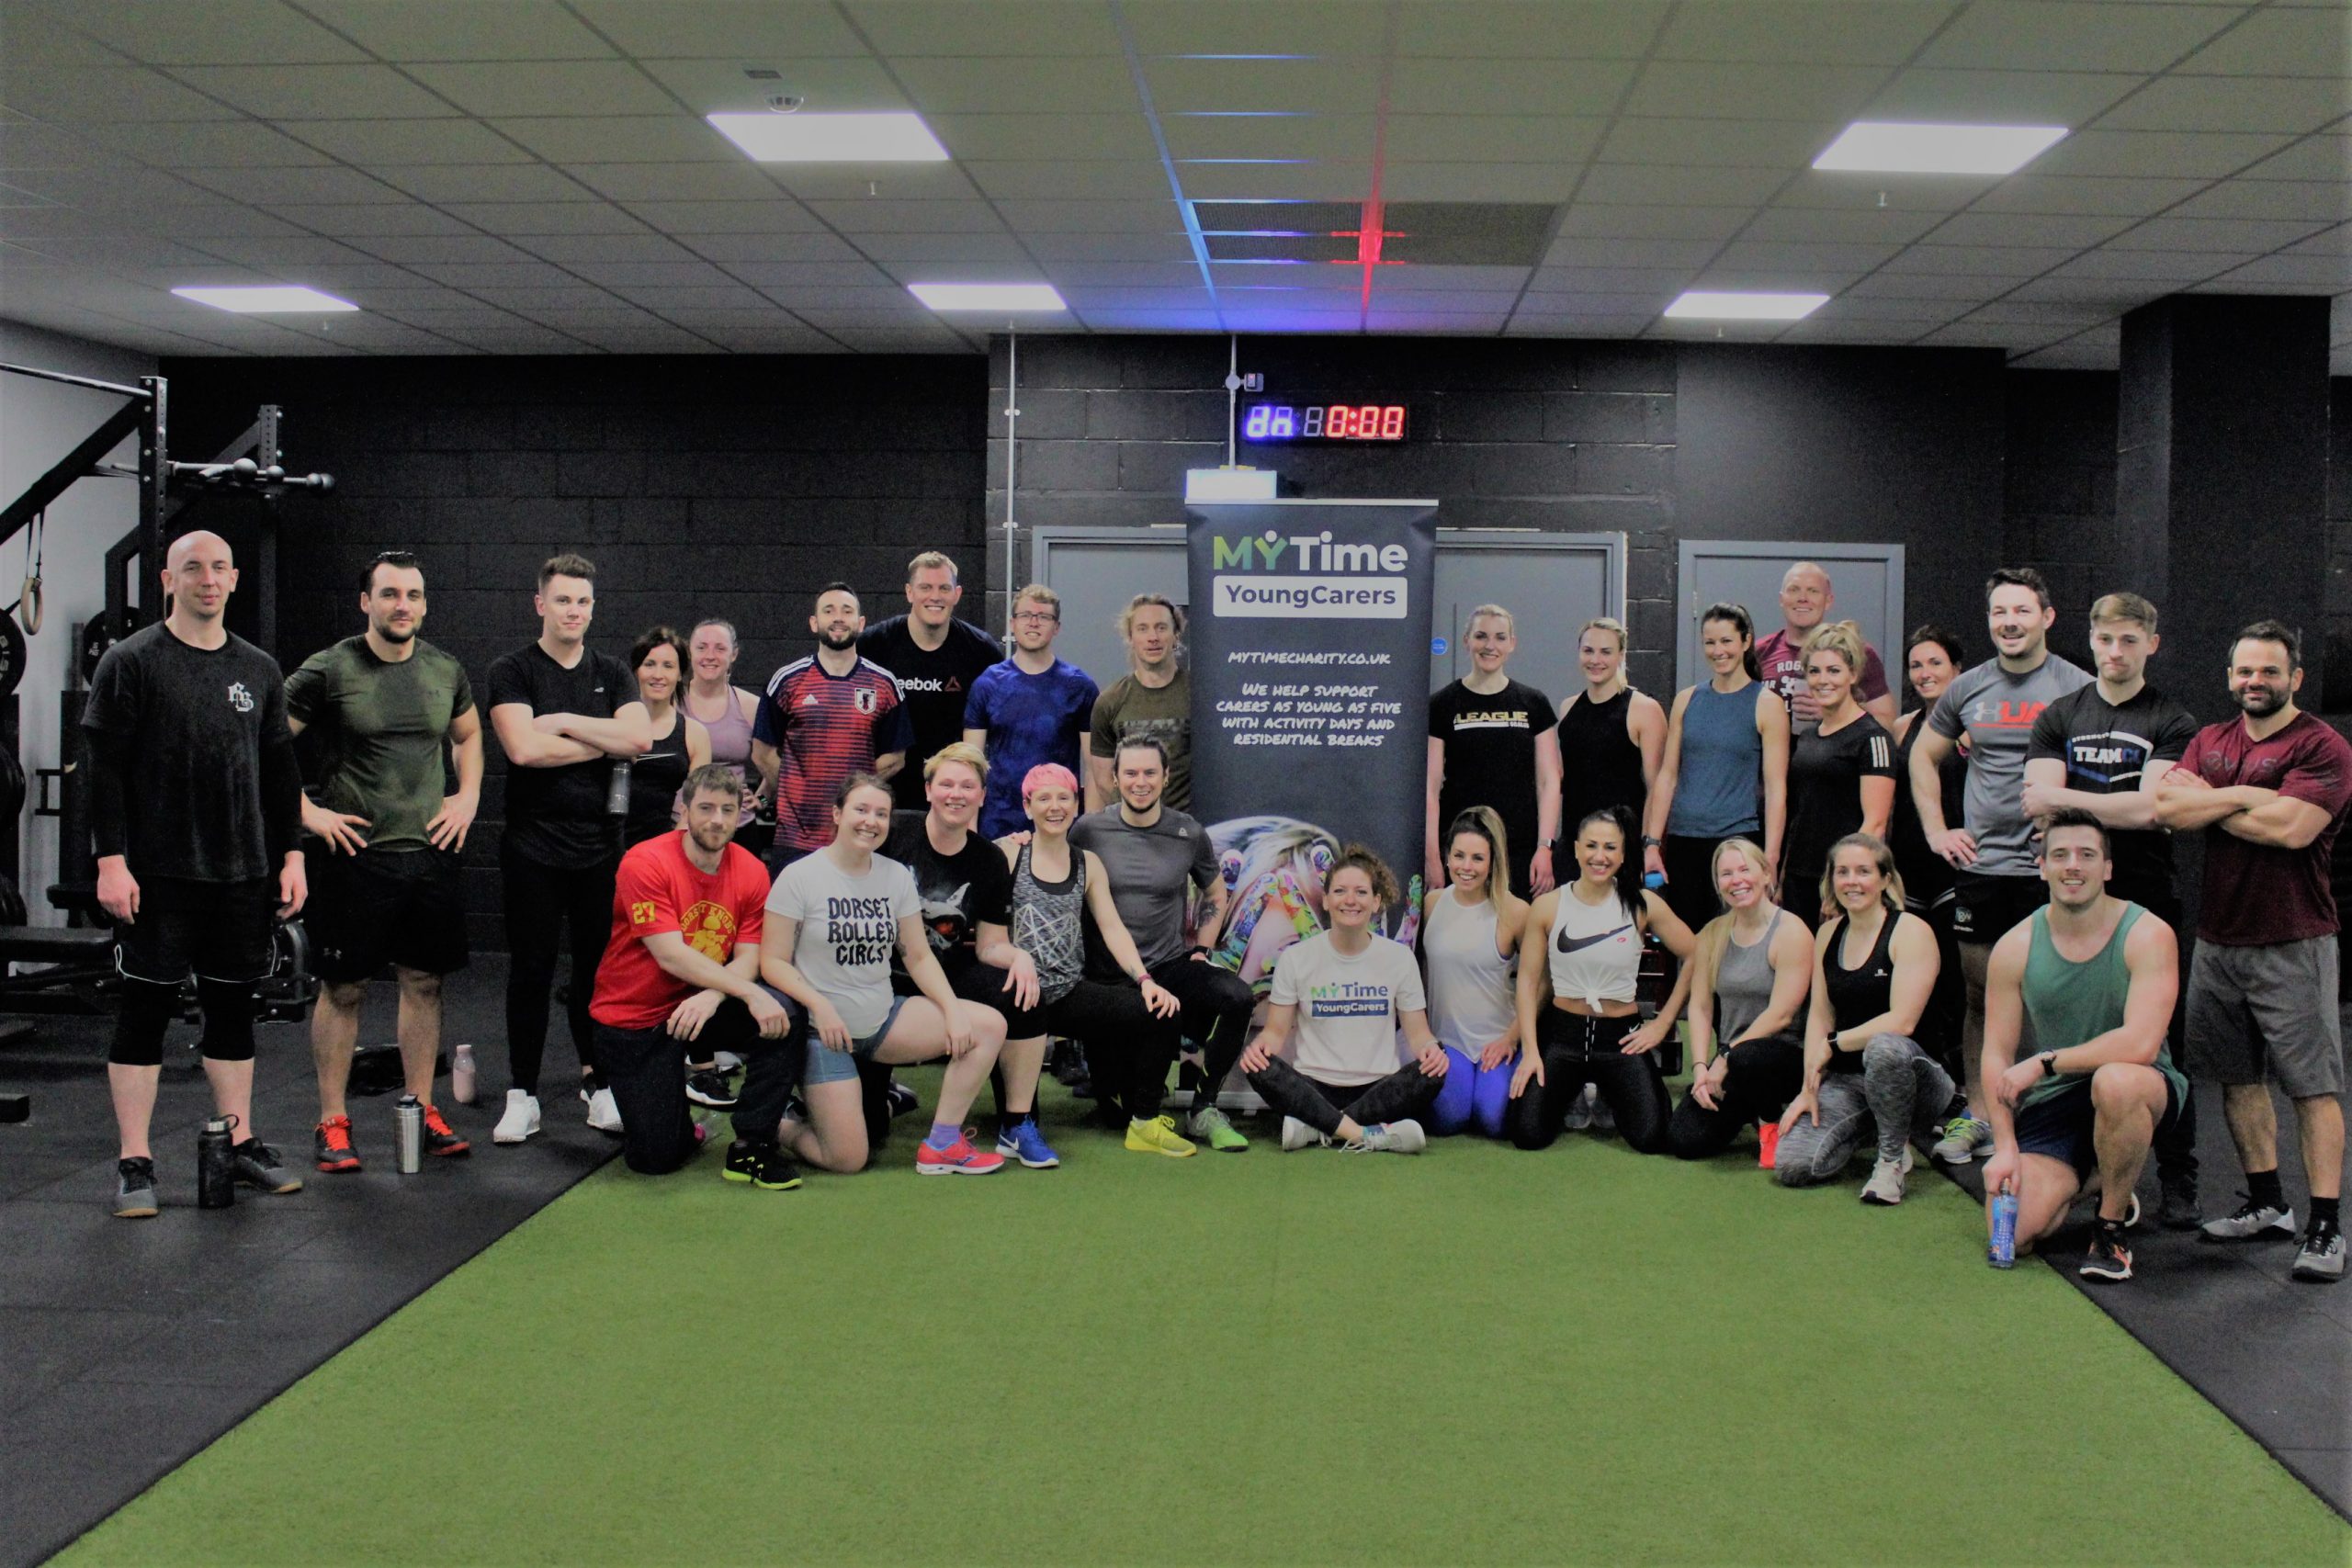 Team CC gym show their weighty support for MYTime Young Carers Charity